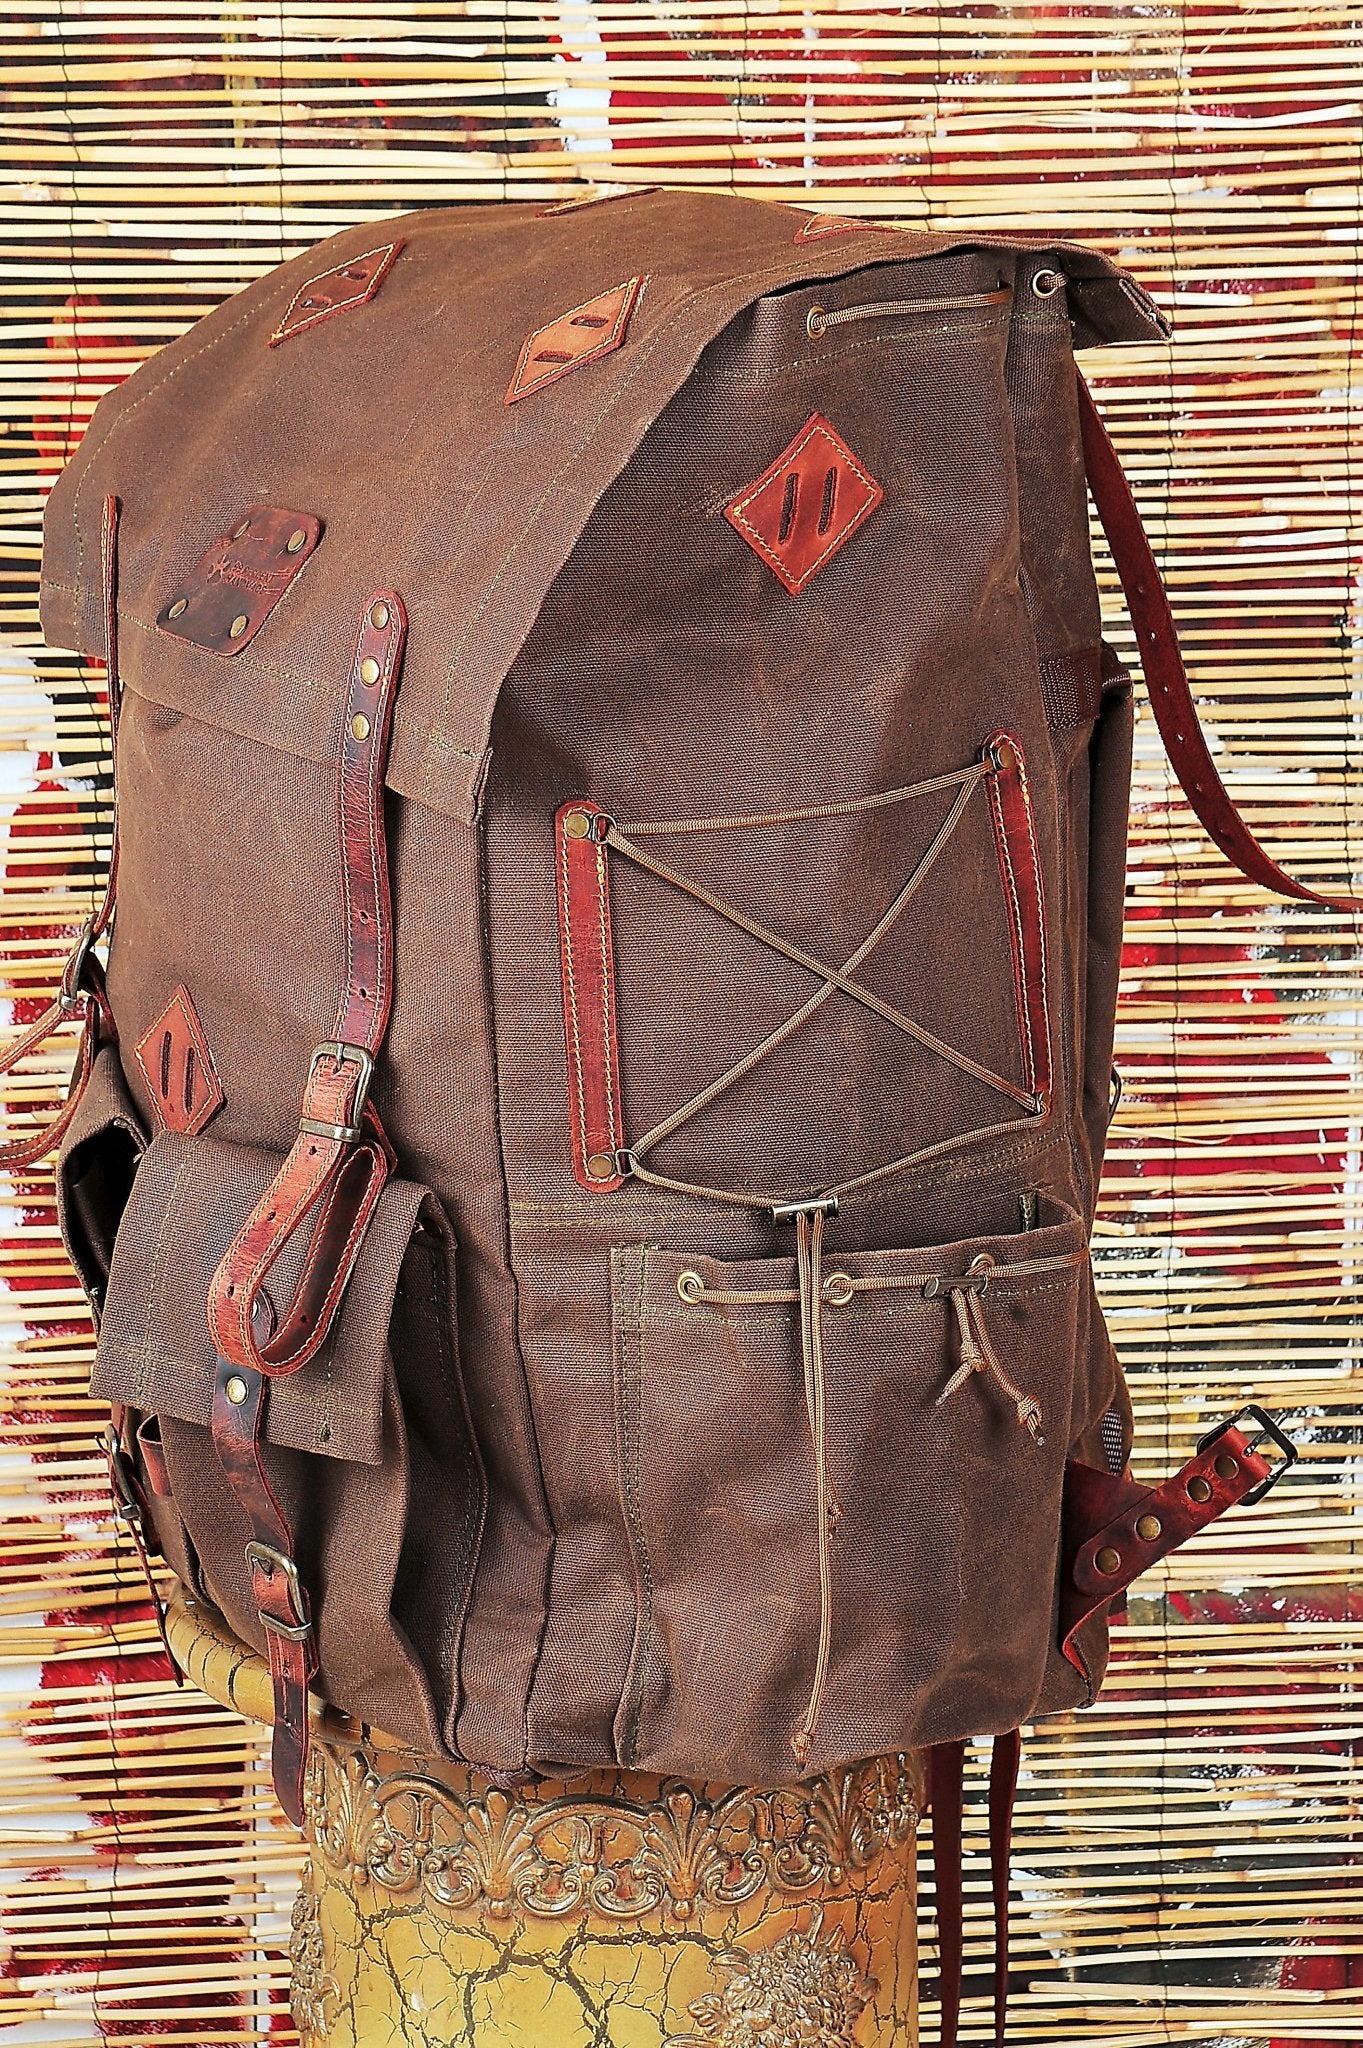 30L to 50L | Bushcraft Backpack | Brown, Green, Dhaki Colours | Handmade Leather, Waxed Canvas Backpack for Travel-Camping | Personalization bushcraft - camping - hiking backpack 99percenthandmade Brown 30 Liters 